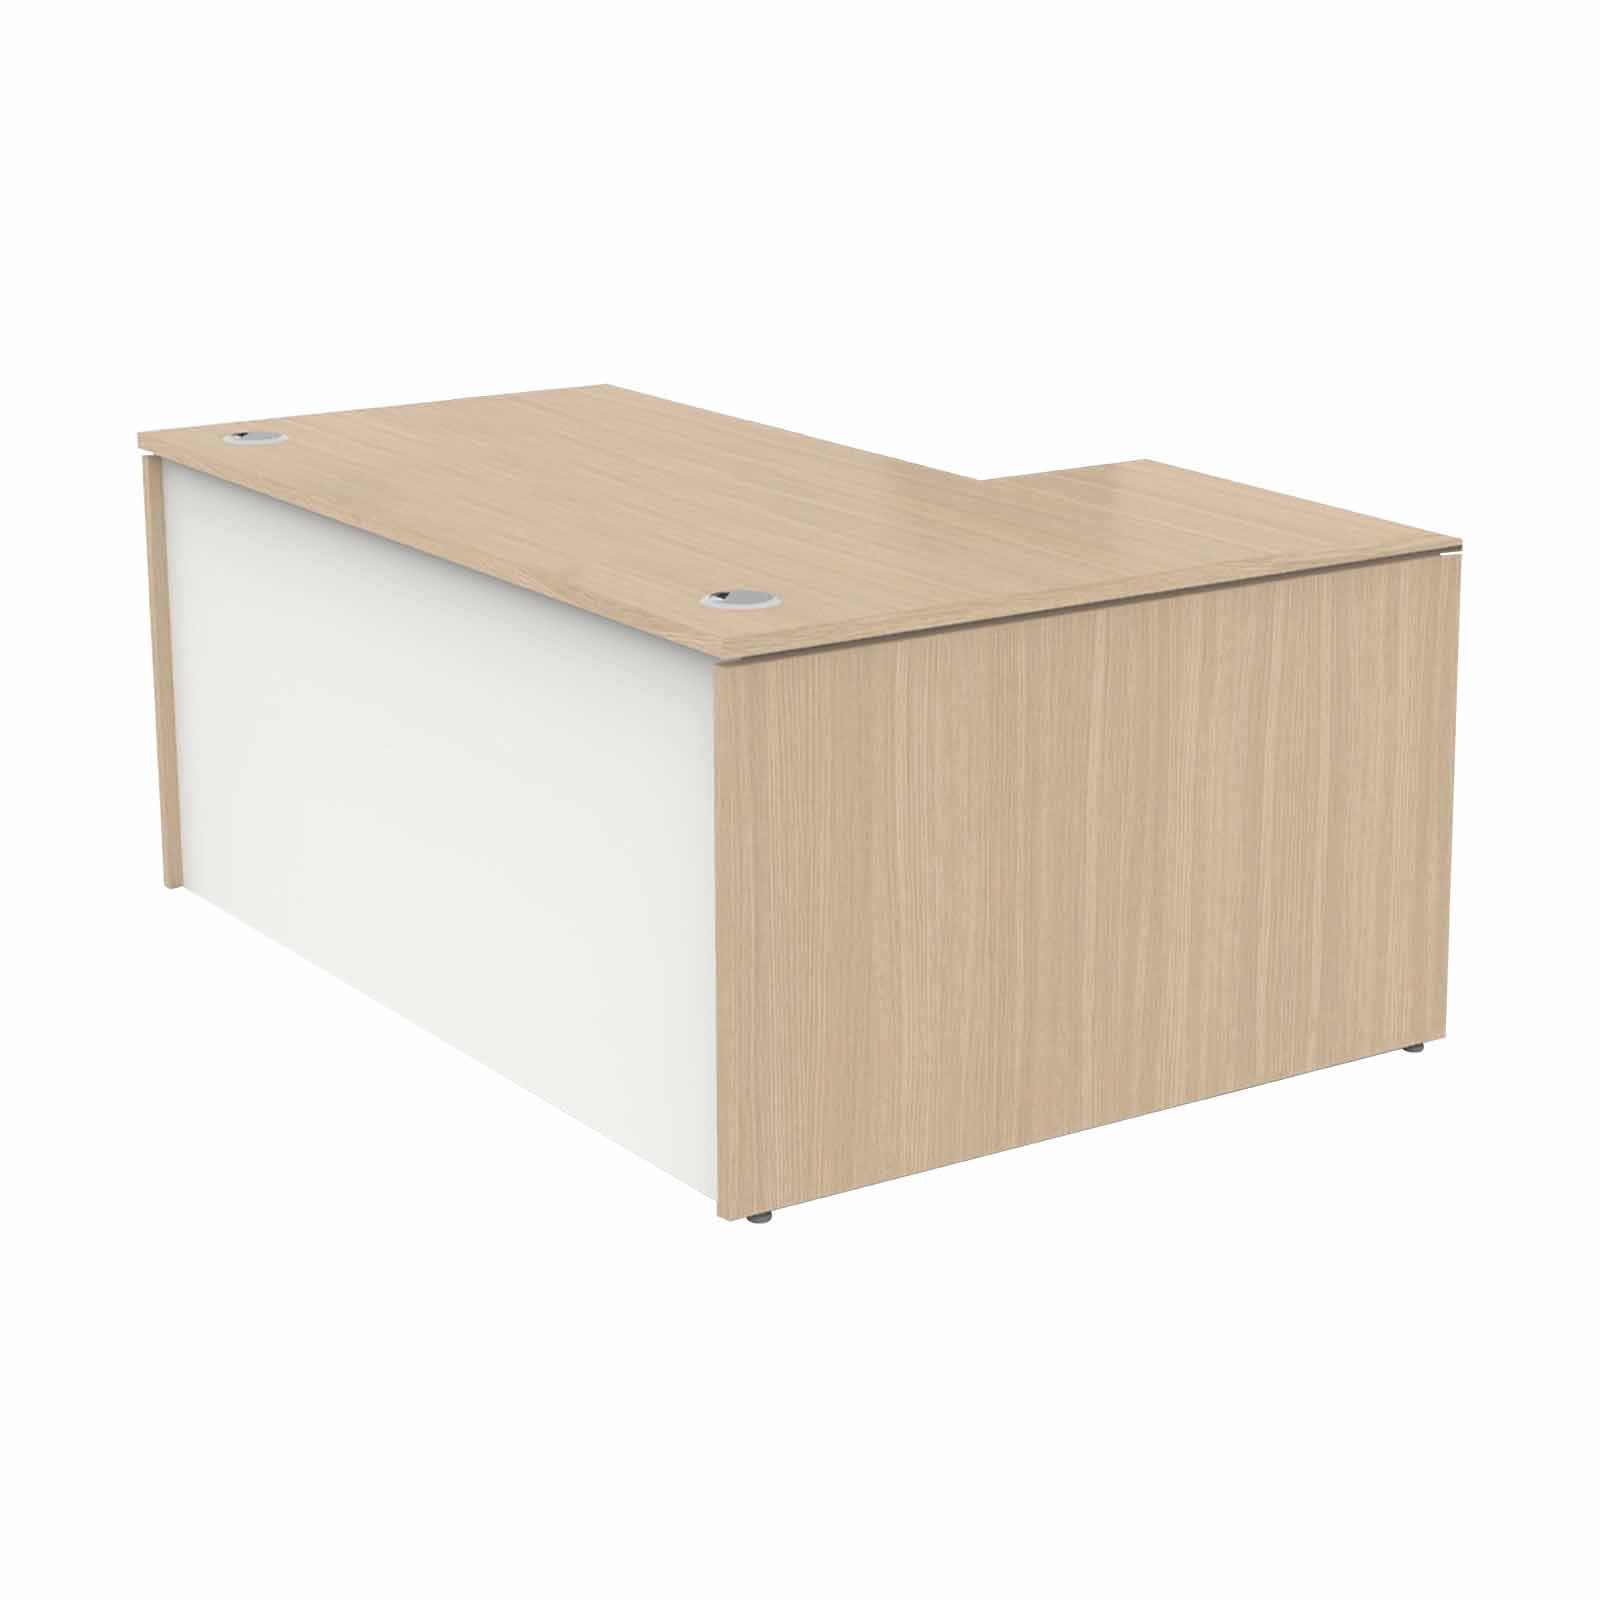 Greeting panel end desk with a return